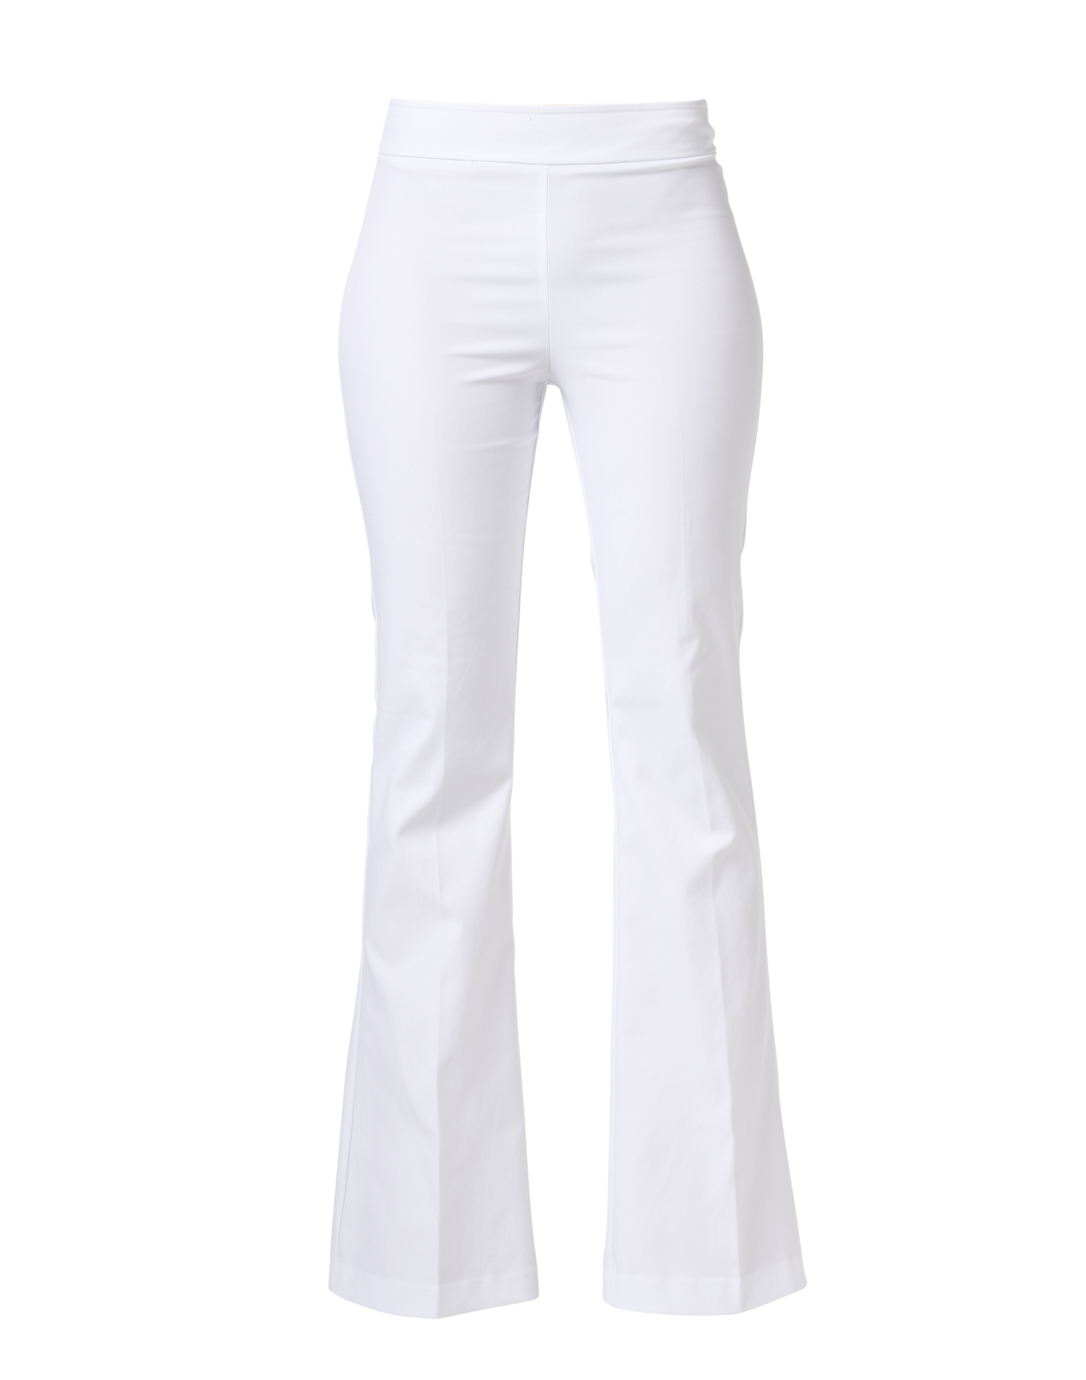 Bellini White Signature Stretch Pull On Pant